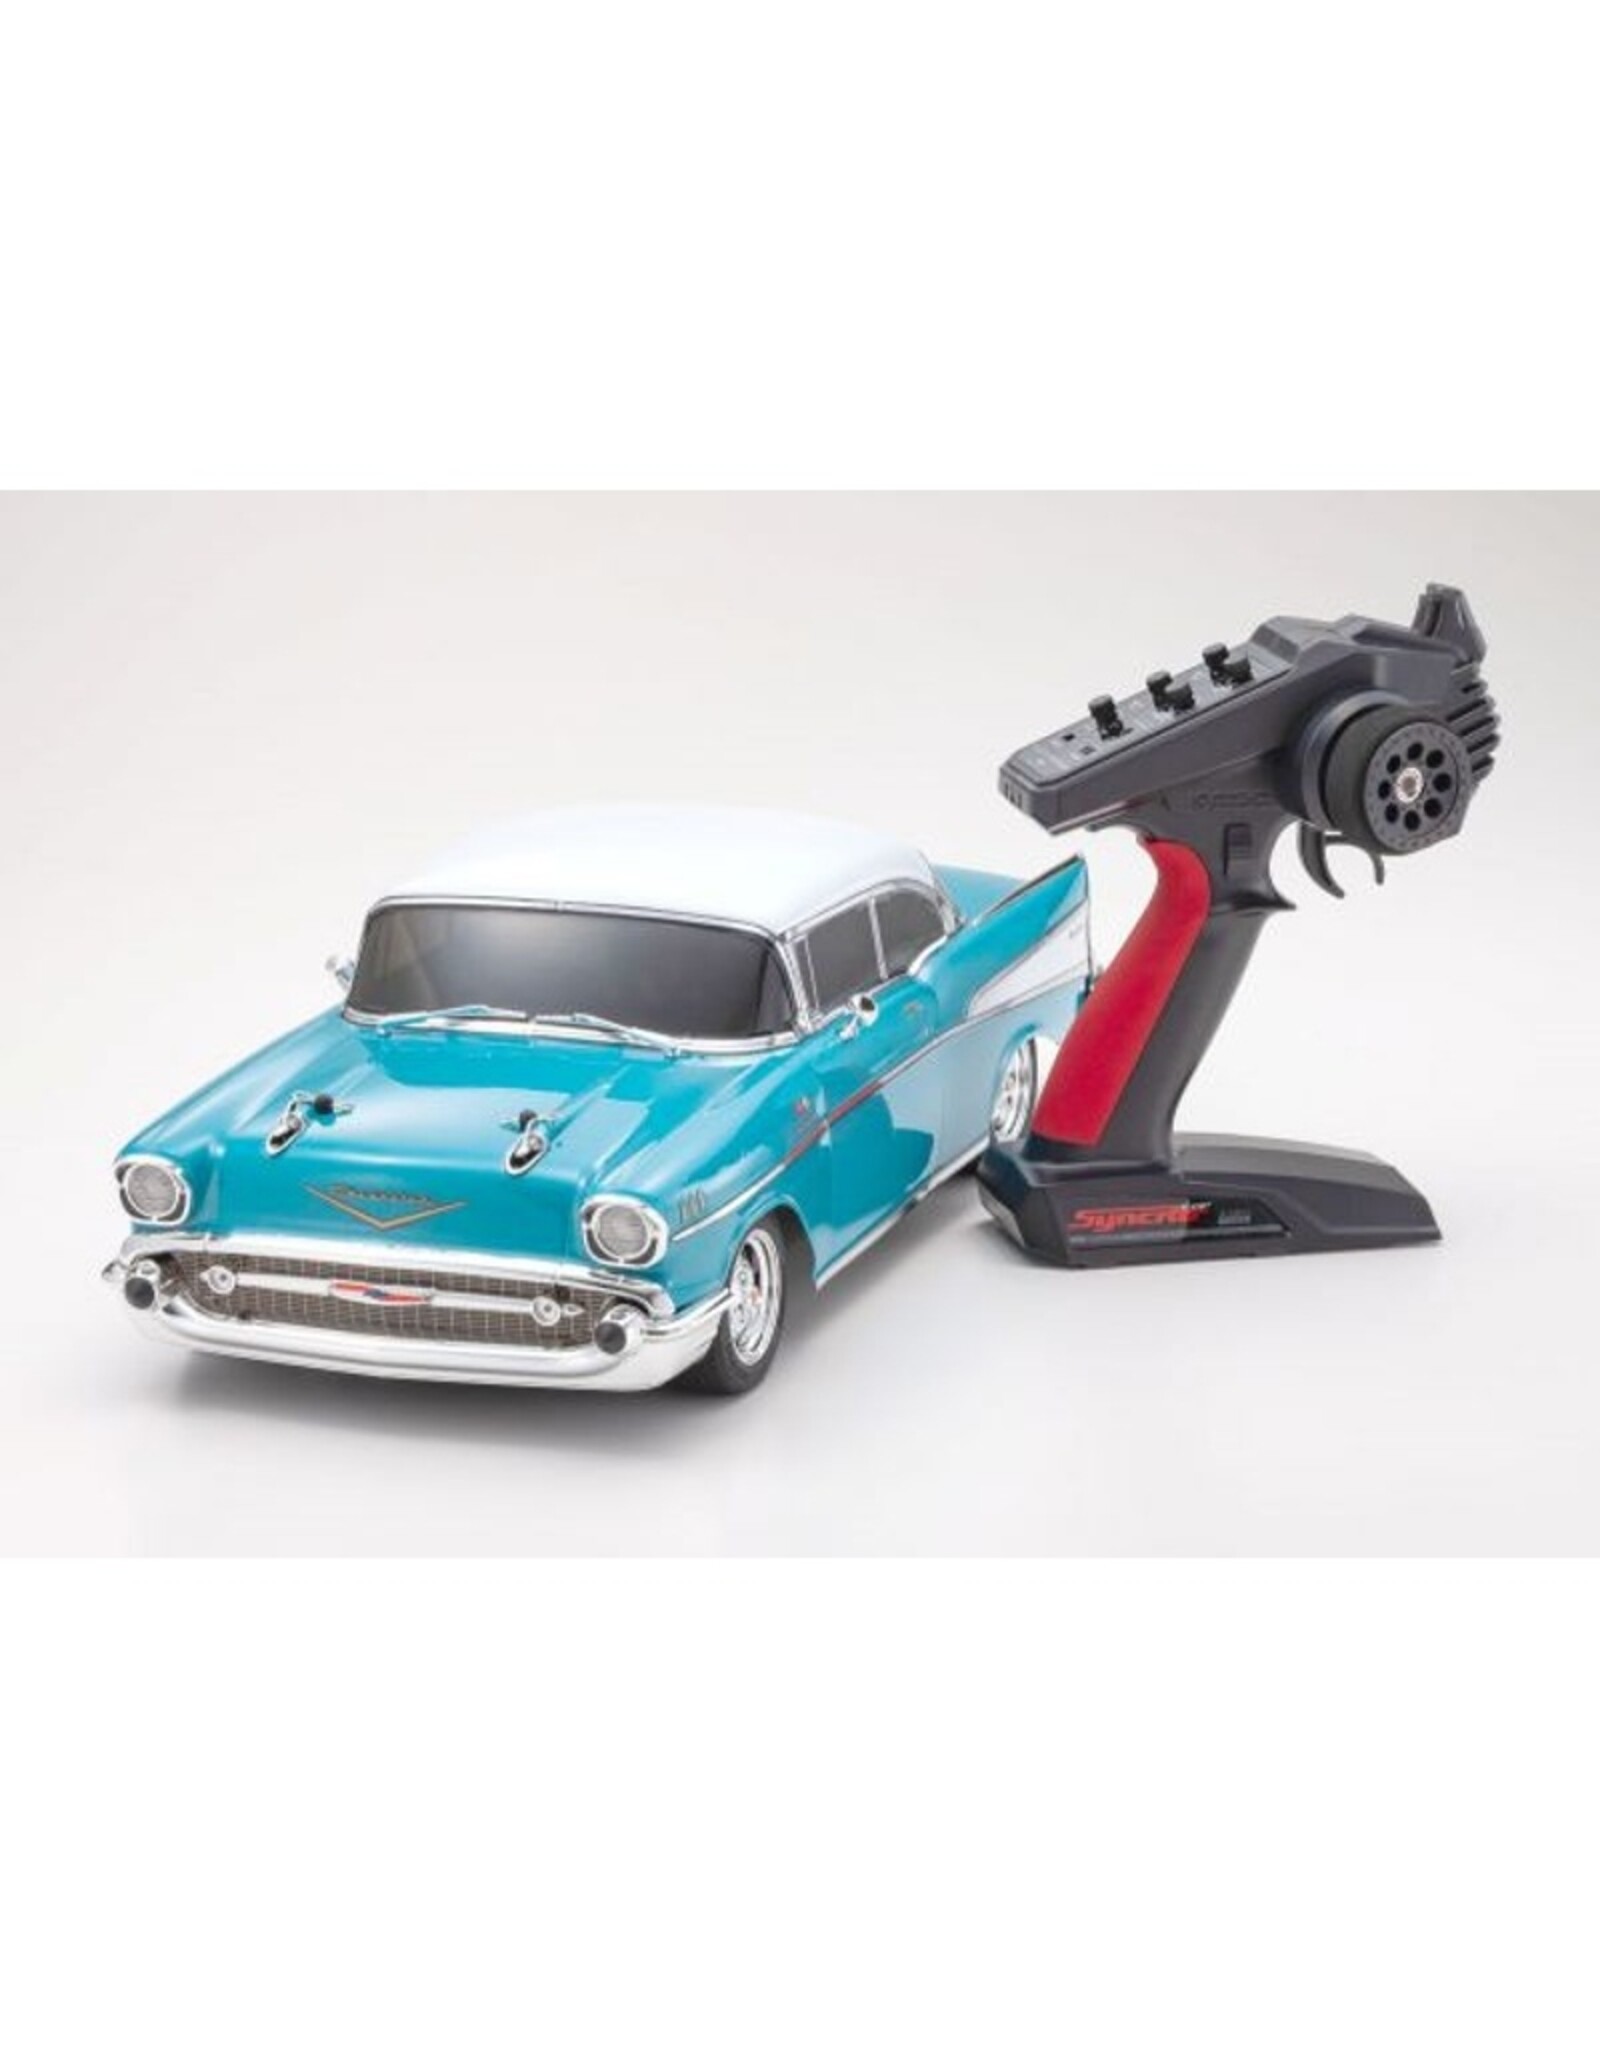 KYOSHO KYO34433T1 Fazer Mk2 1957 Bel Air Coupe Turquoise